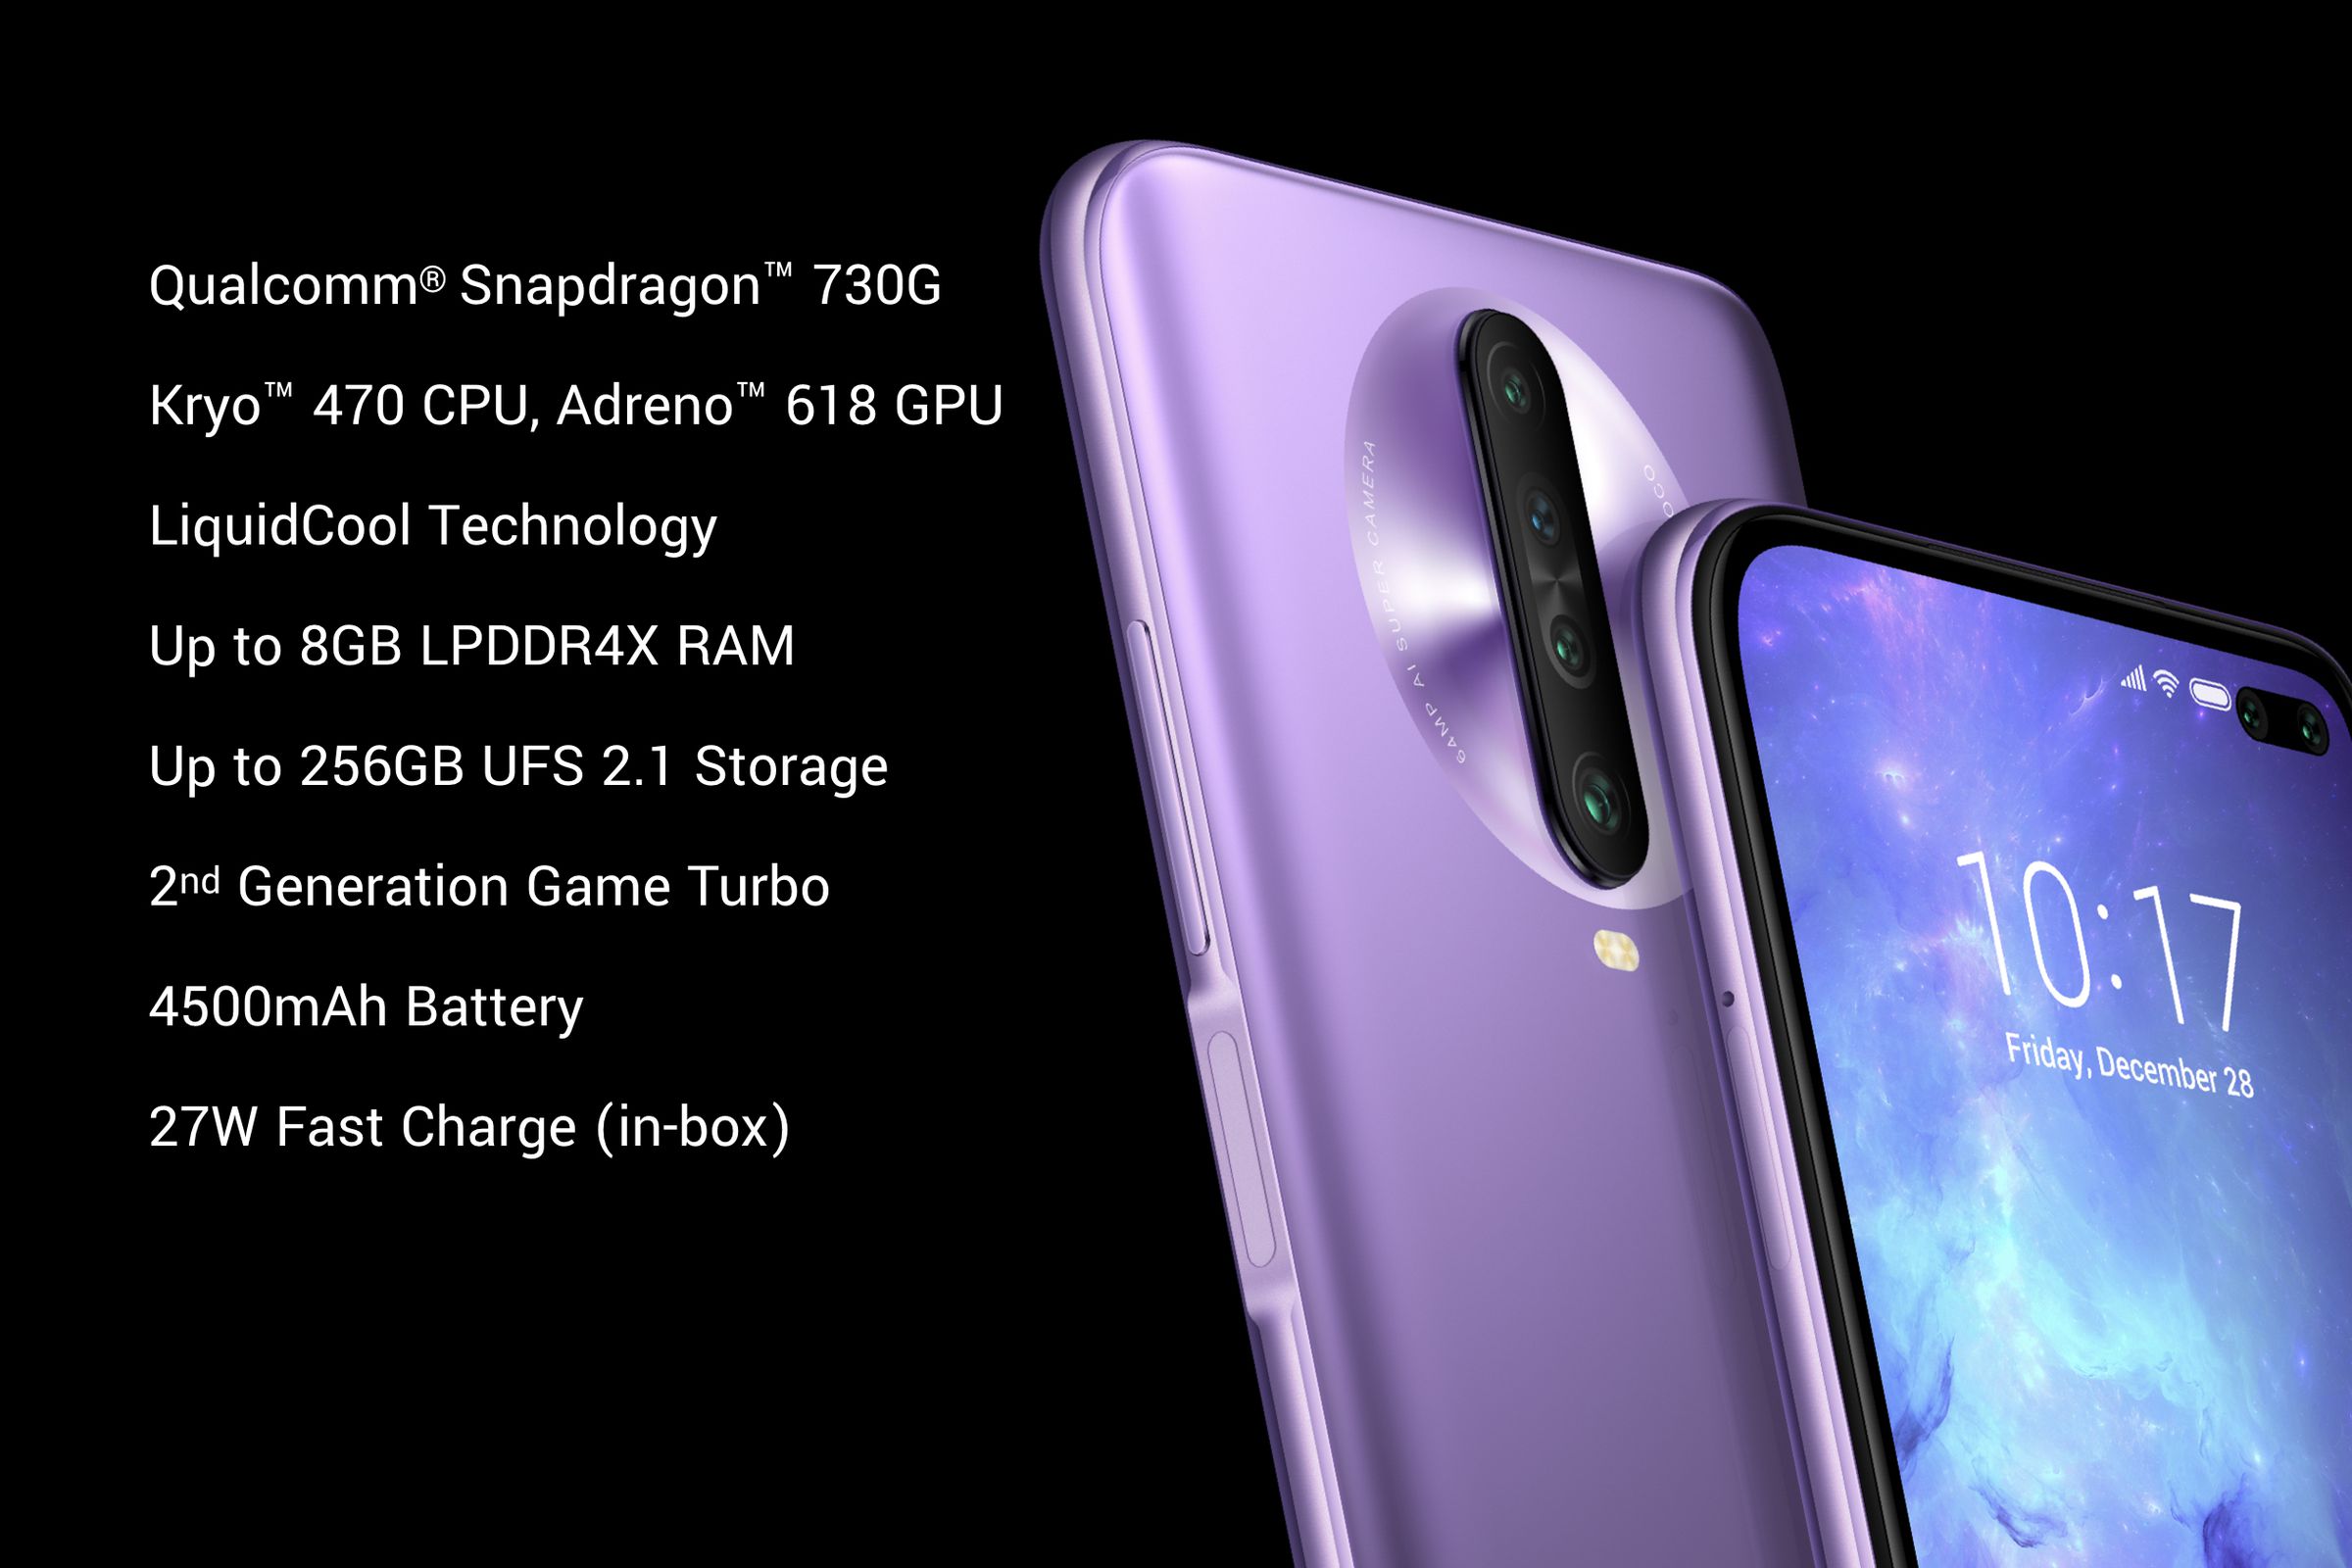 The Poco X2 and its spec sheet